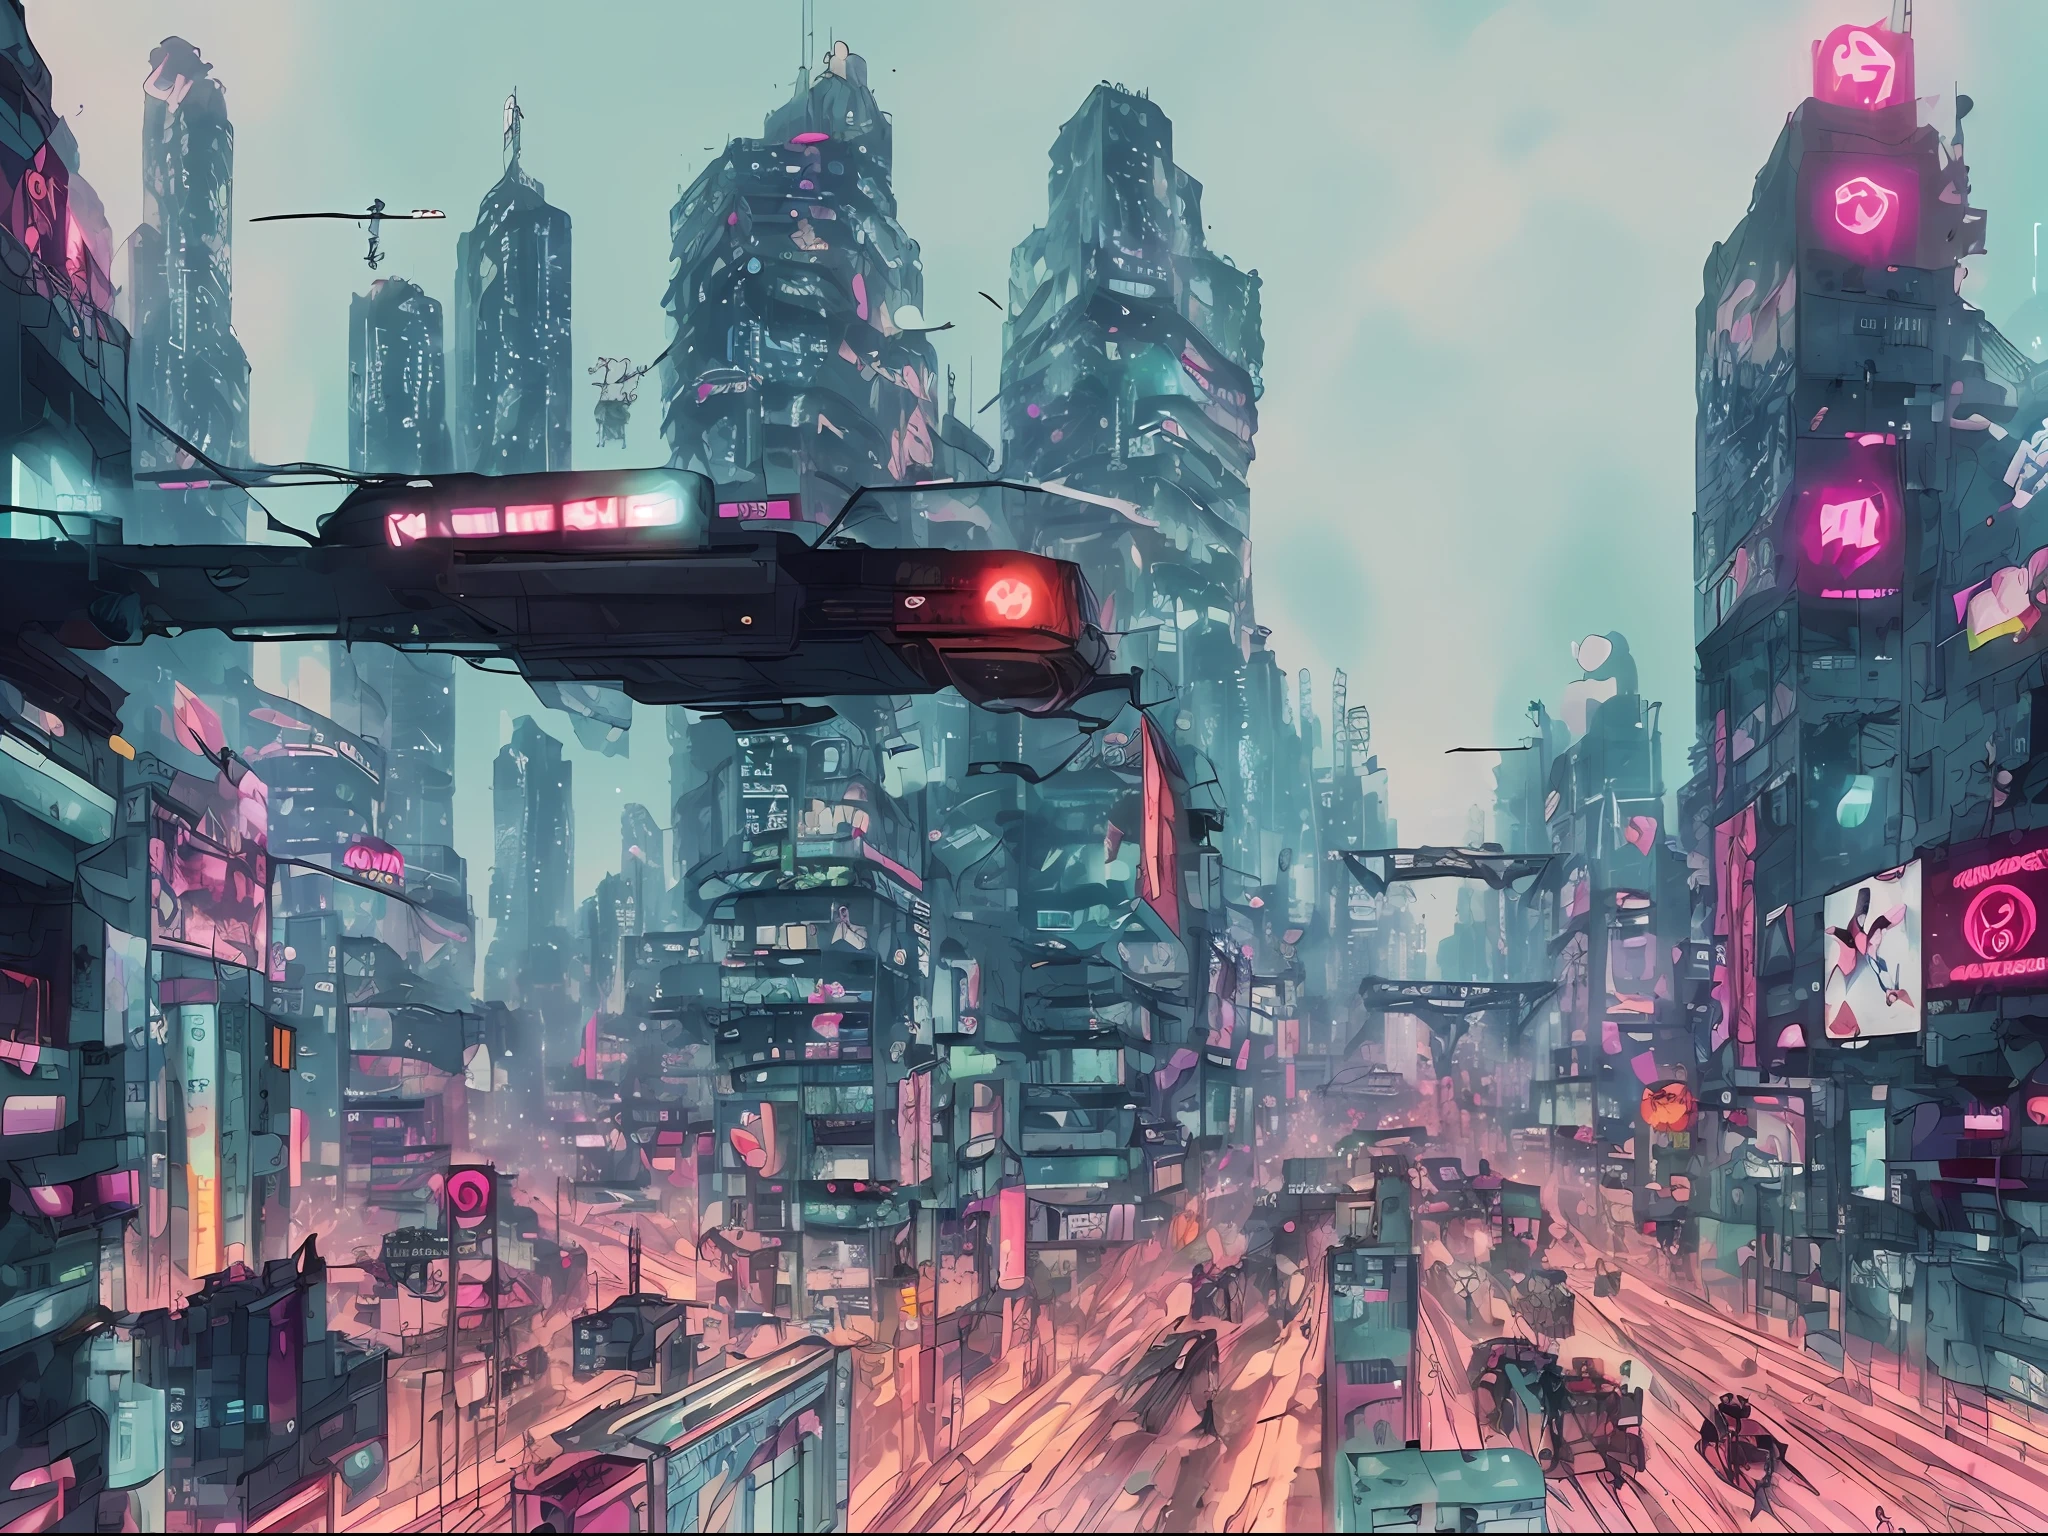 (Obra maestra), (La mejor calidad), (Ultra detallado), (illustration), (tarot), (cyberpunk), (Planta), (Beautiful) - V6 Image of an anime-style city of Alita Combat Angel being invaded by a giant red robot while its citizens look on intently